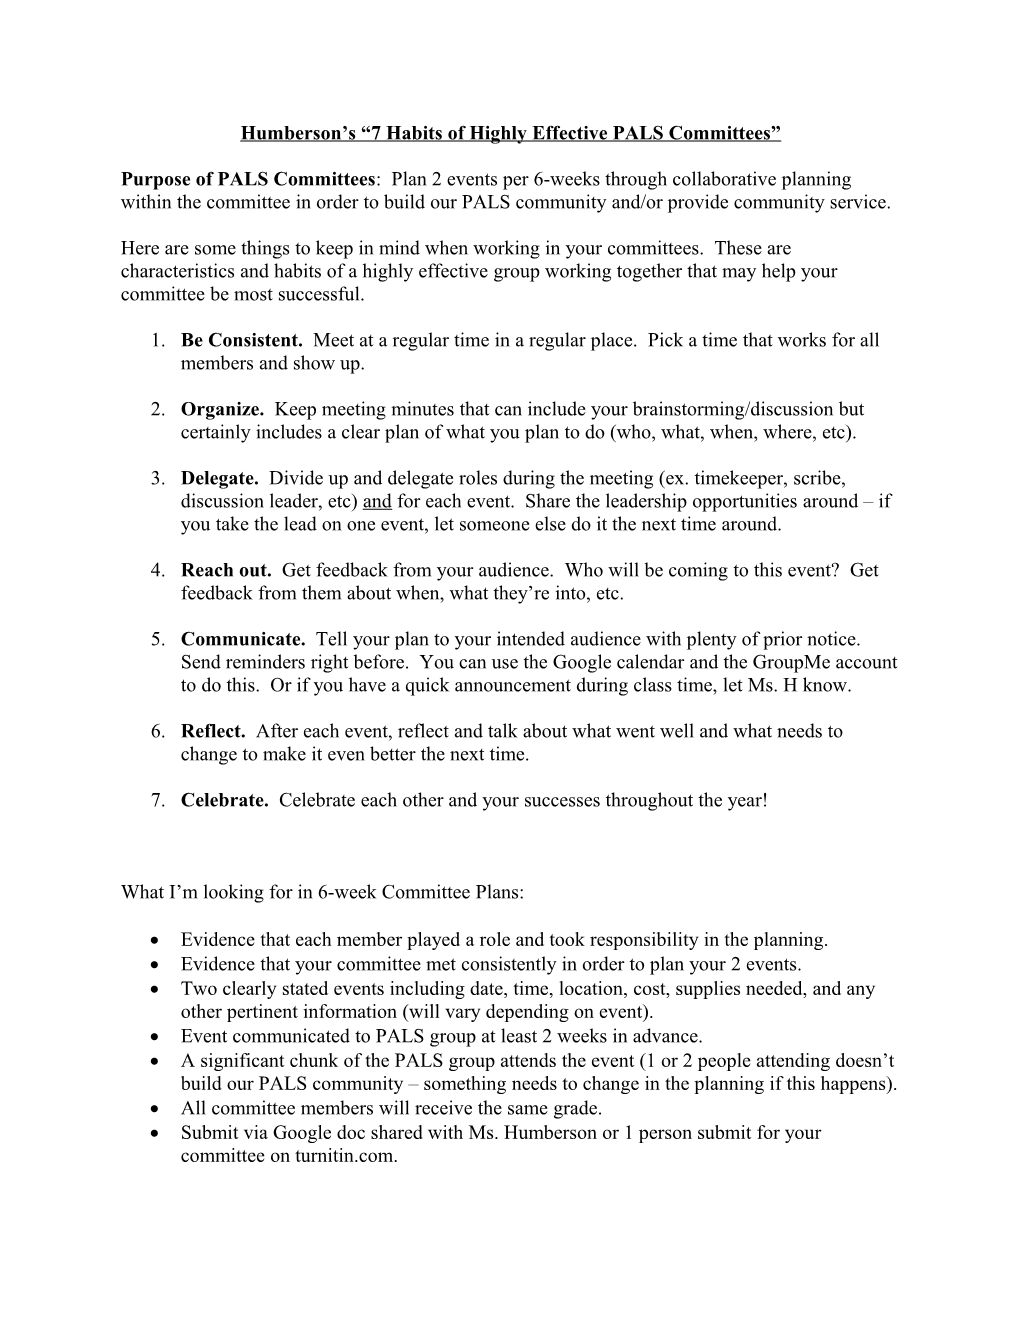 Humberson S 7 Habits of Highly Effective PALS Committees